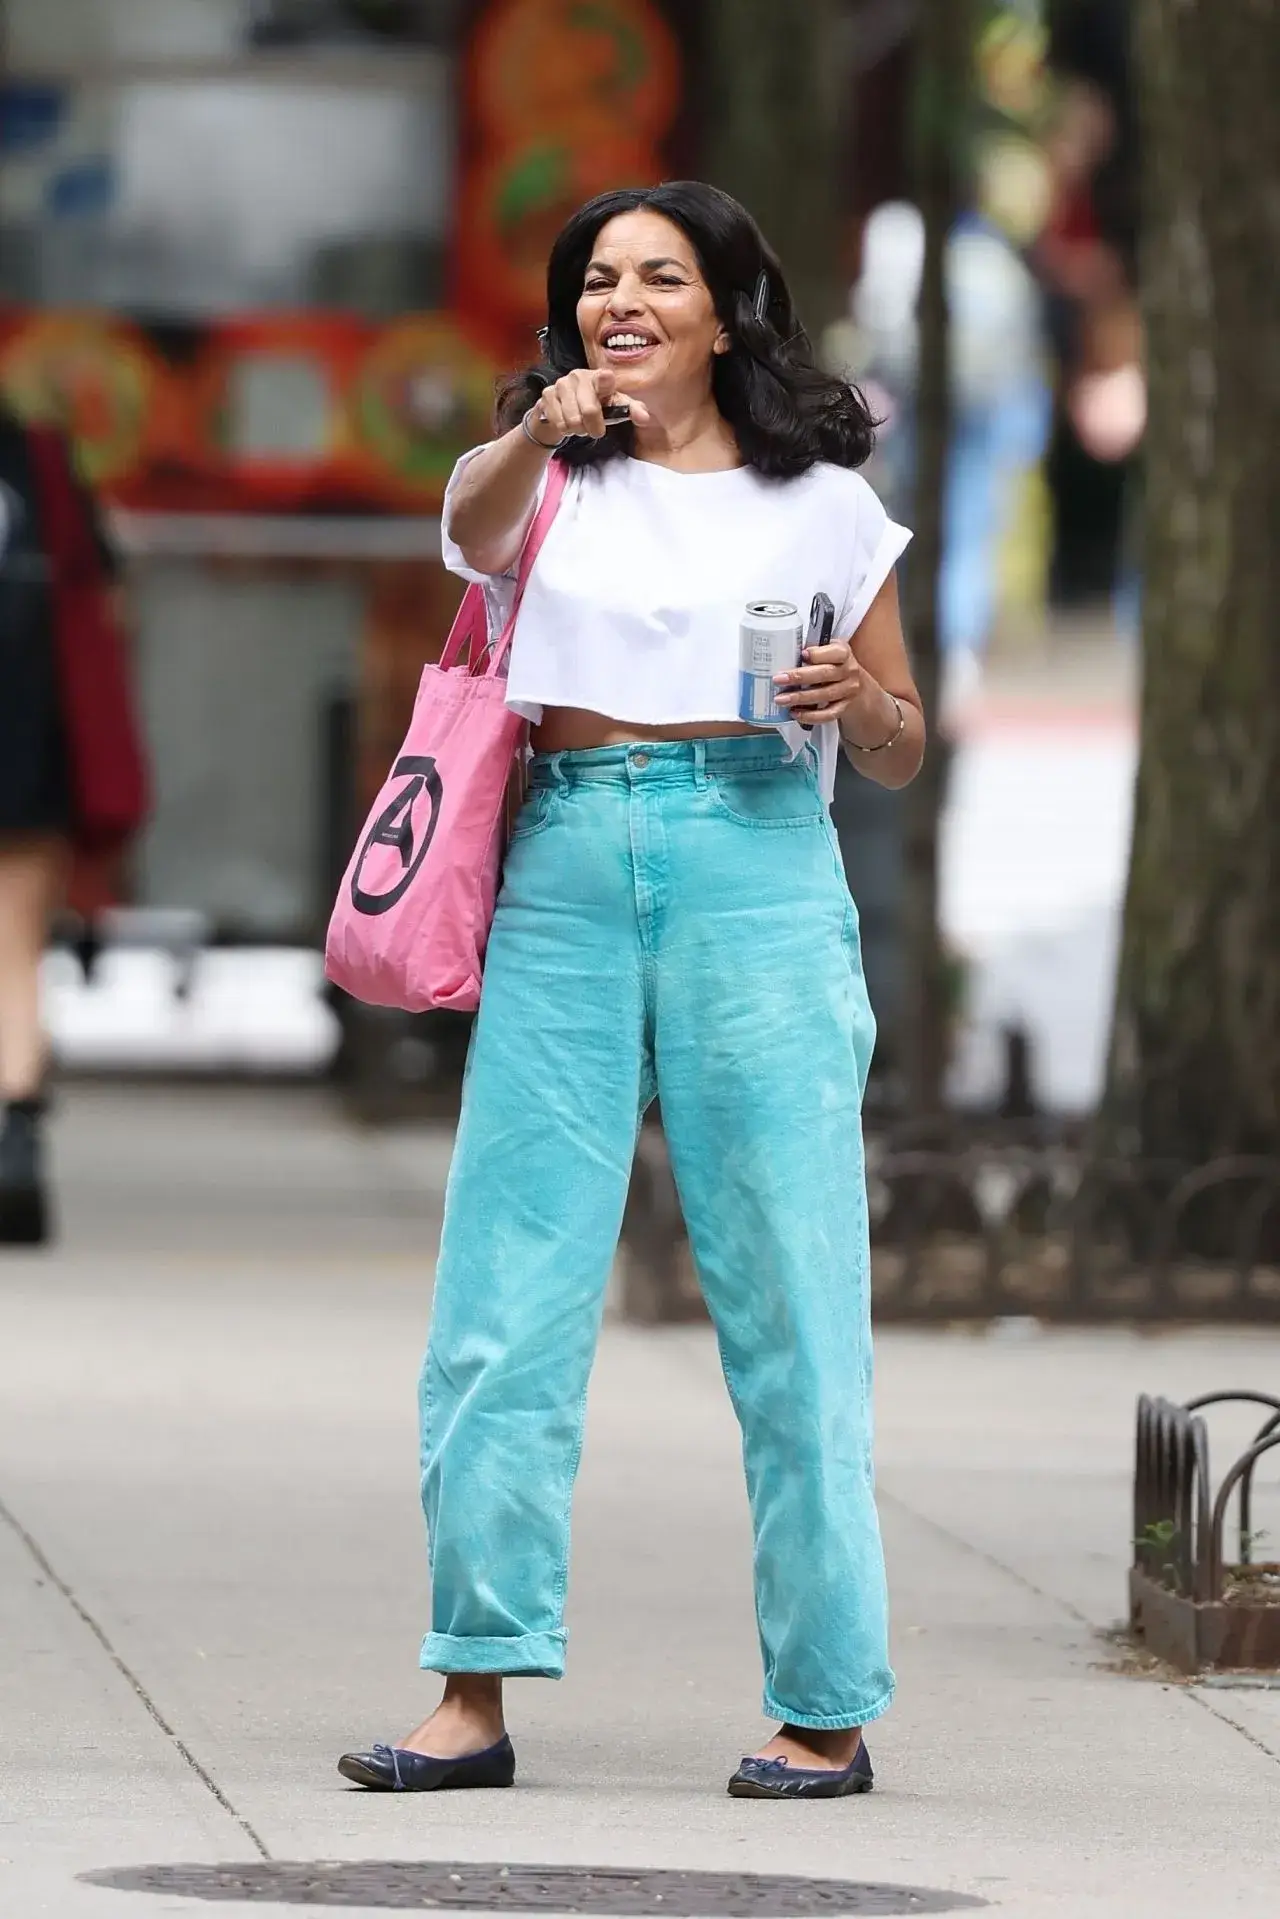 SARITA CHOUDHURY STILLS ON THE SET OF AND JUST LIKE THAT IN NEW YORK